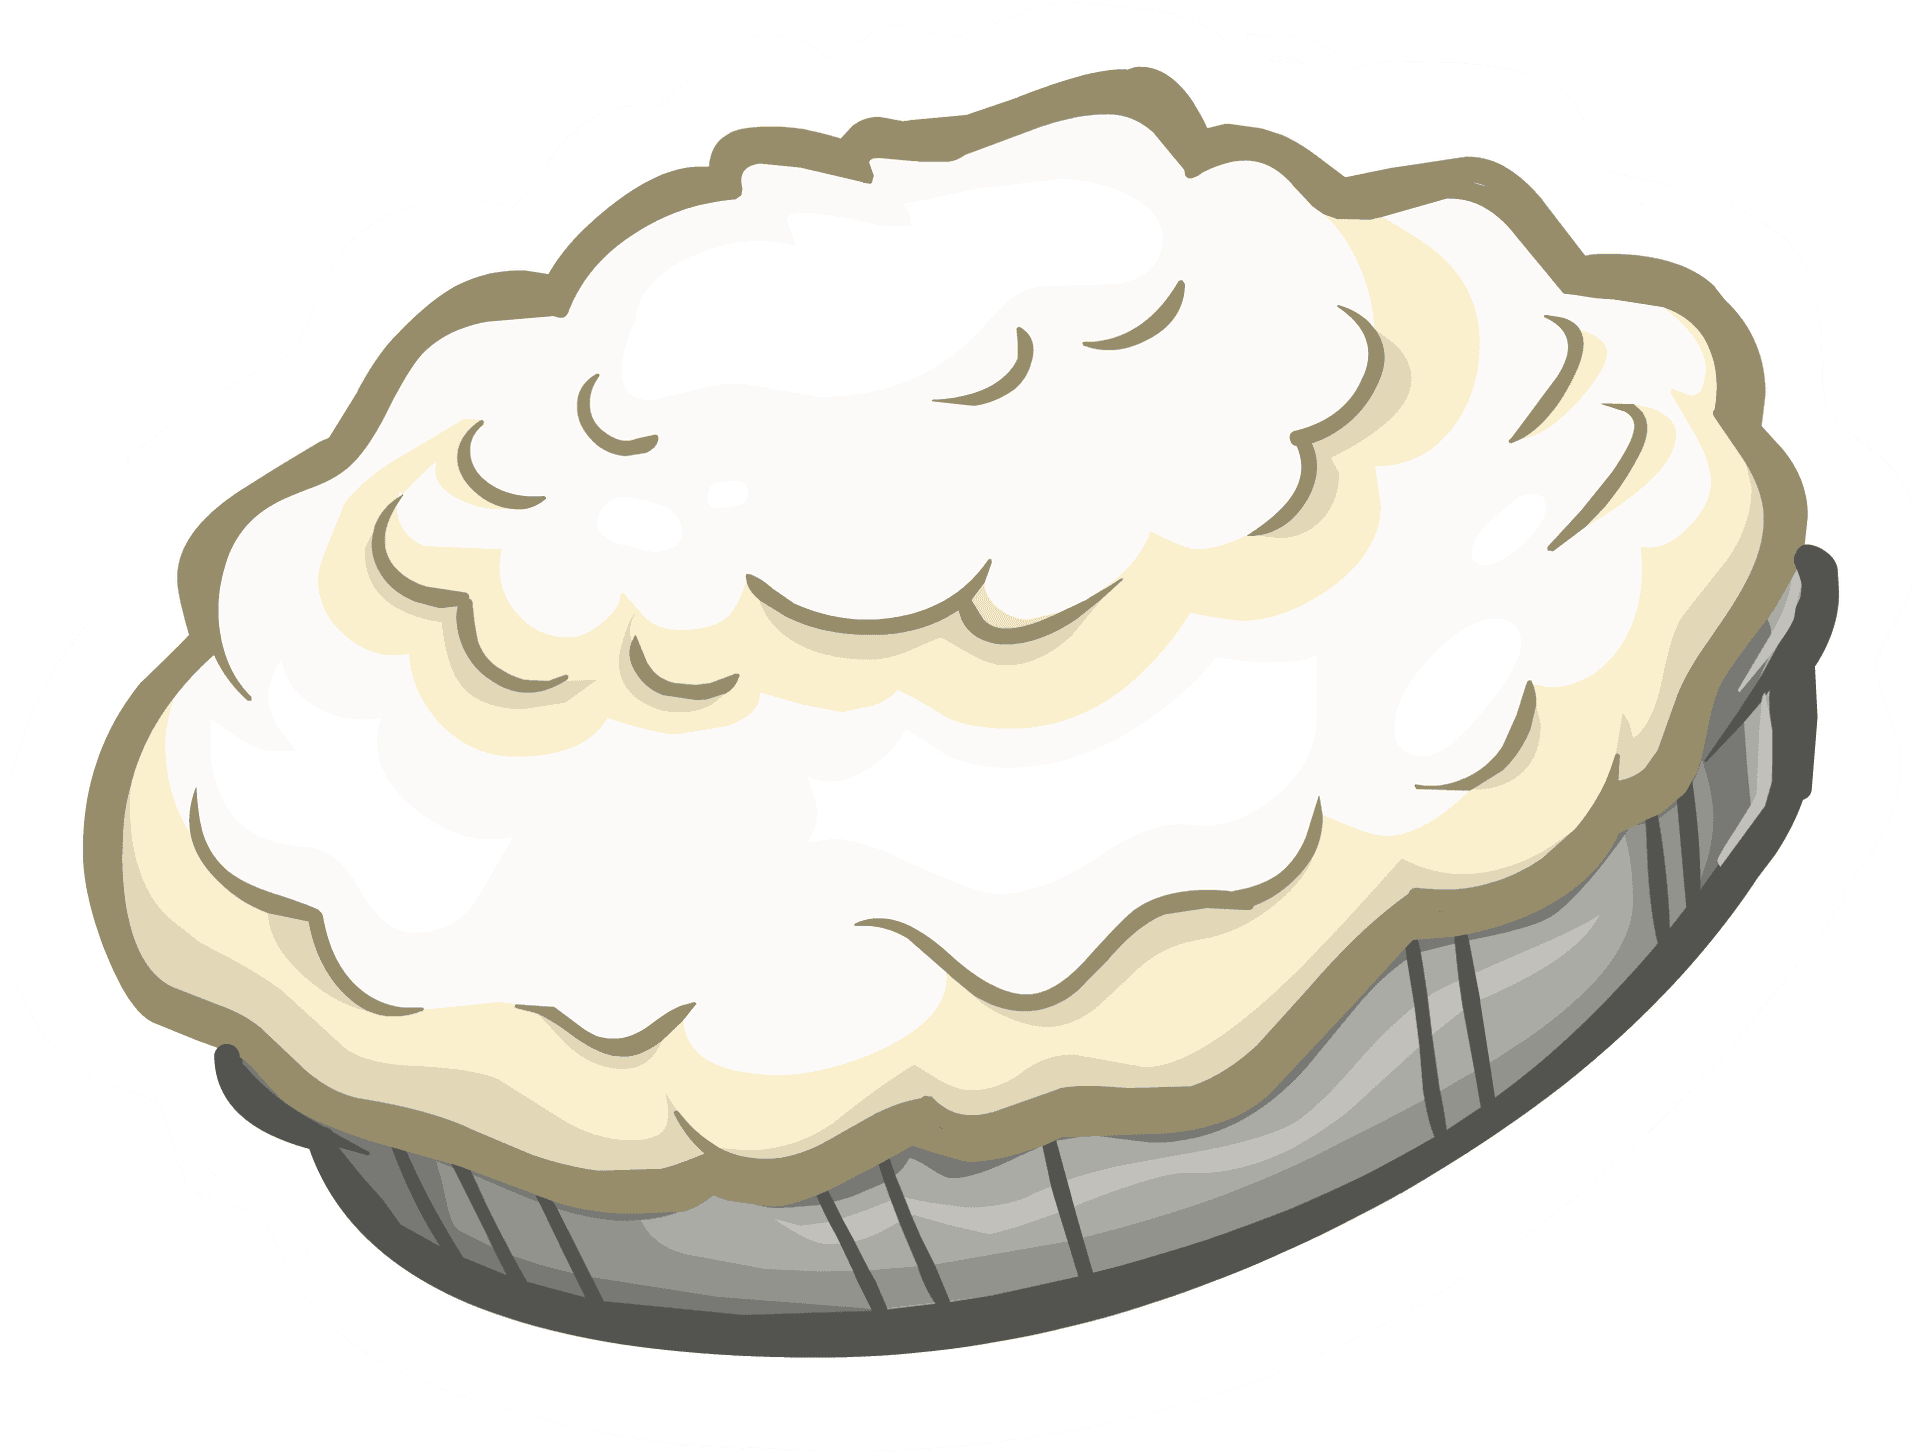 Creamy Whipped Pie Illustration.png PNG